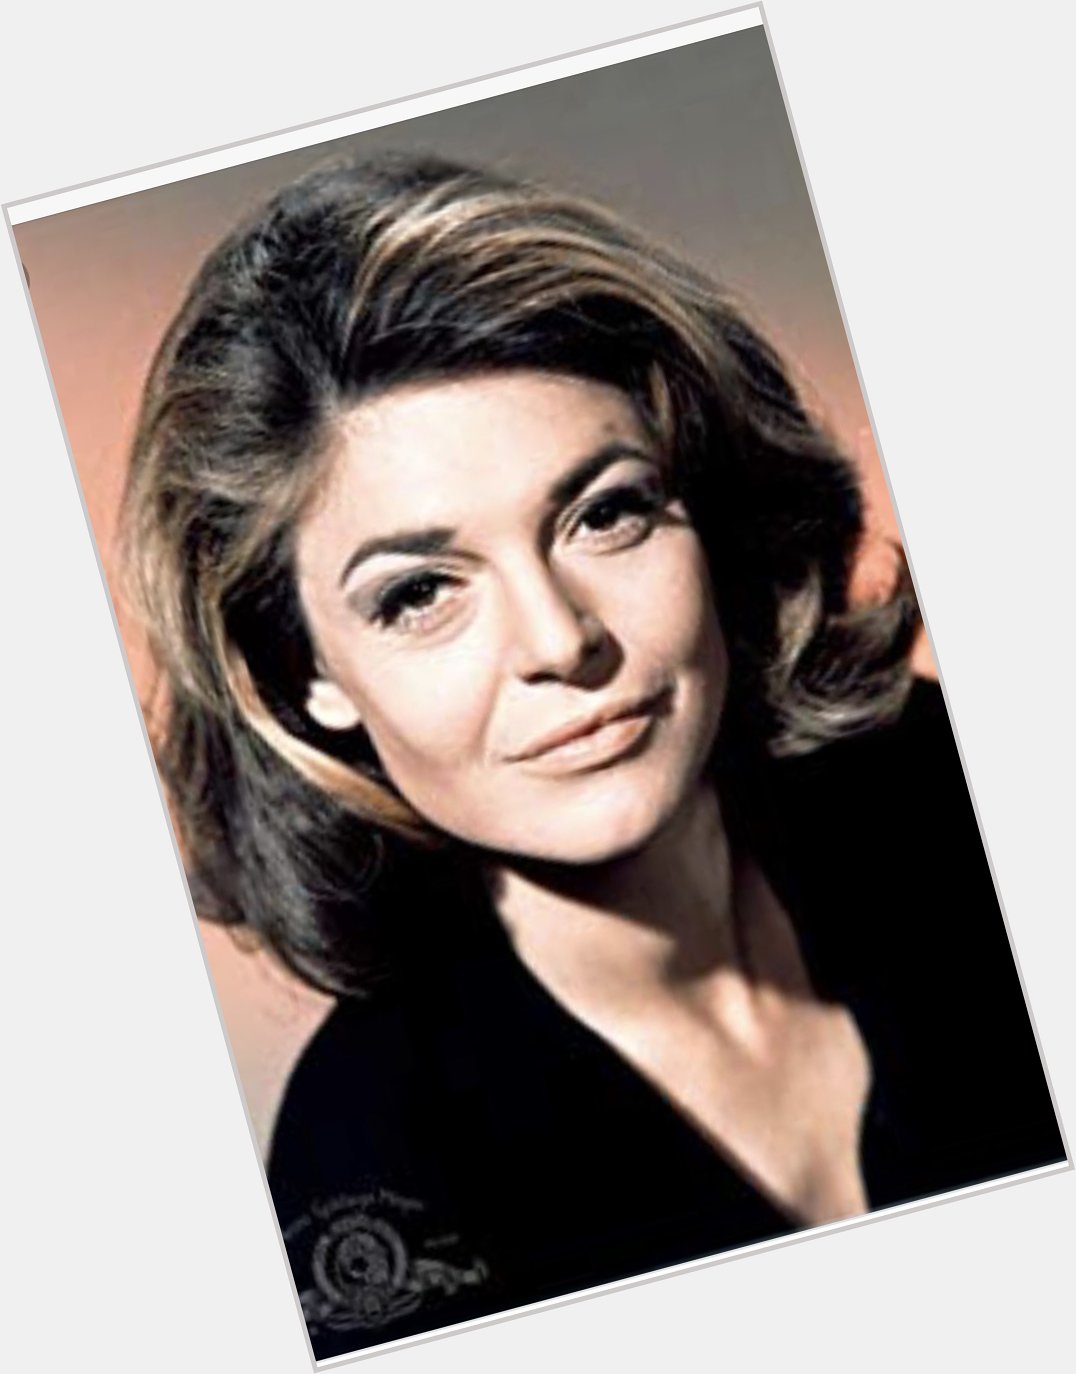  Happy Birthday to Anne Bancroft.. she put the spark in many films .. Mrs.Robinson, you Rocked It! 